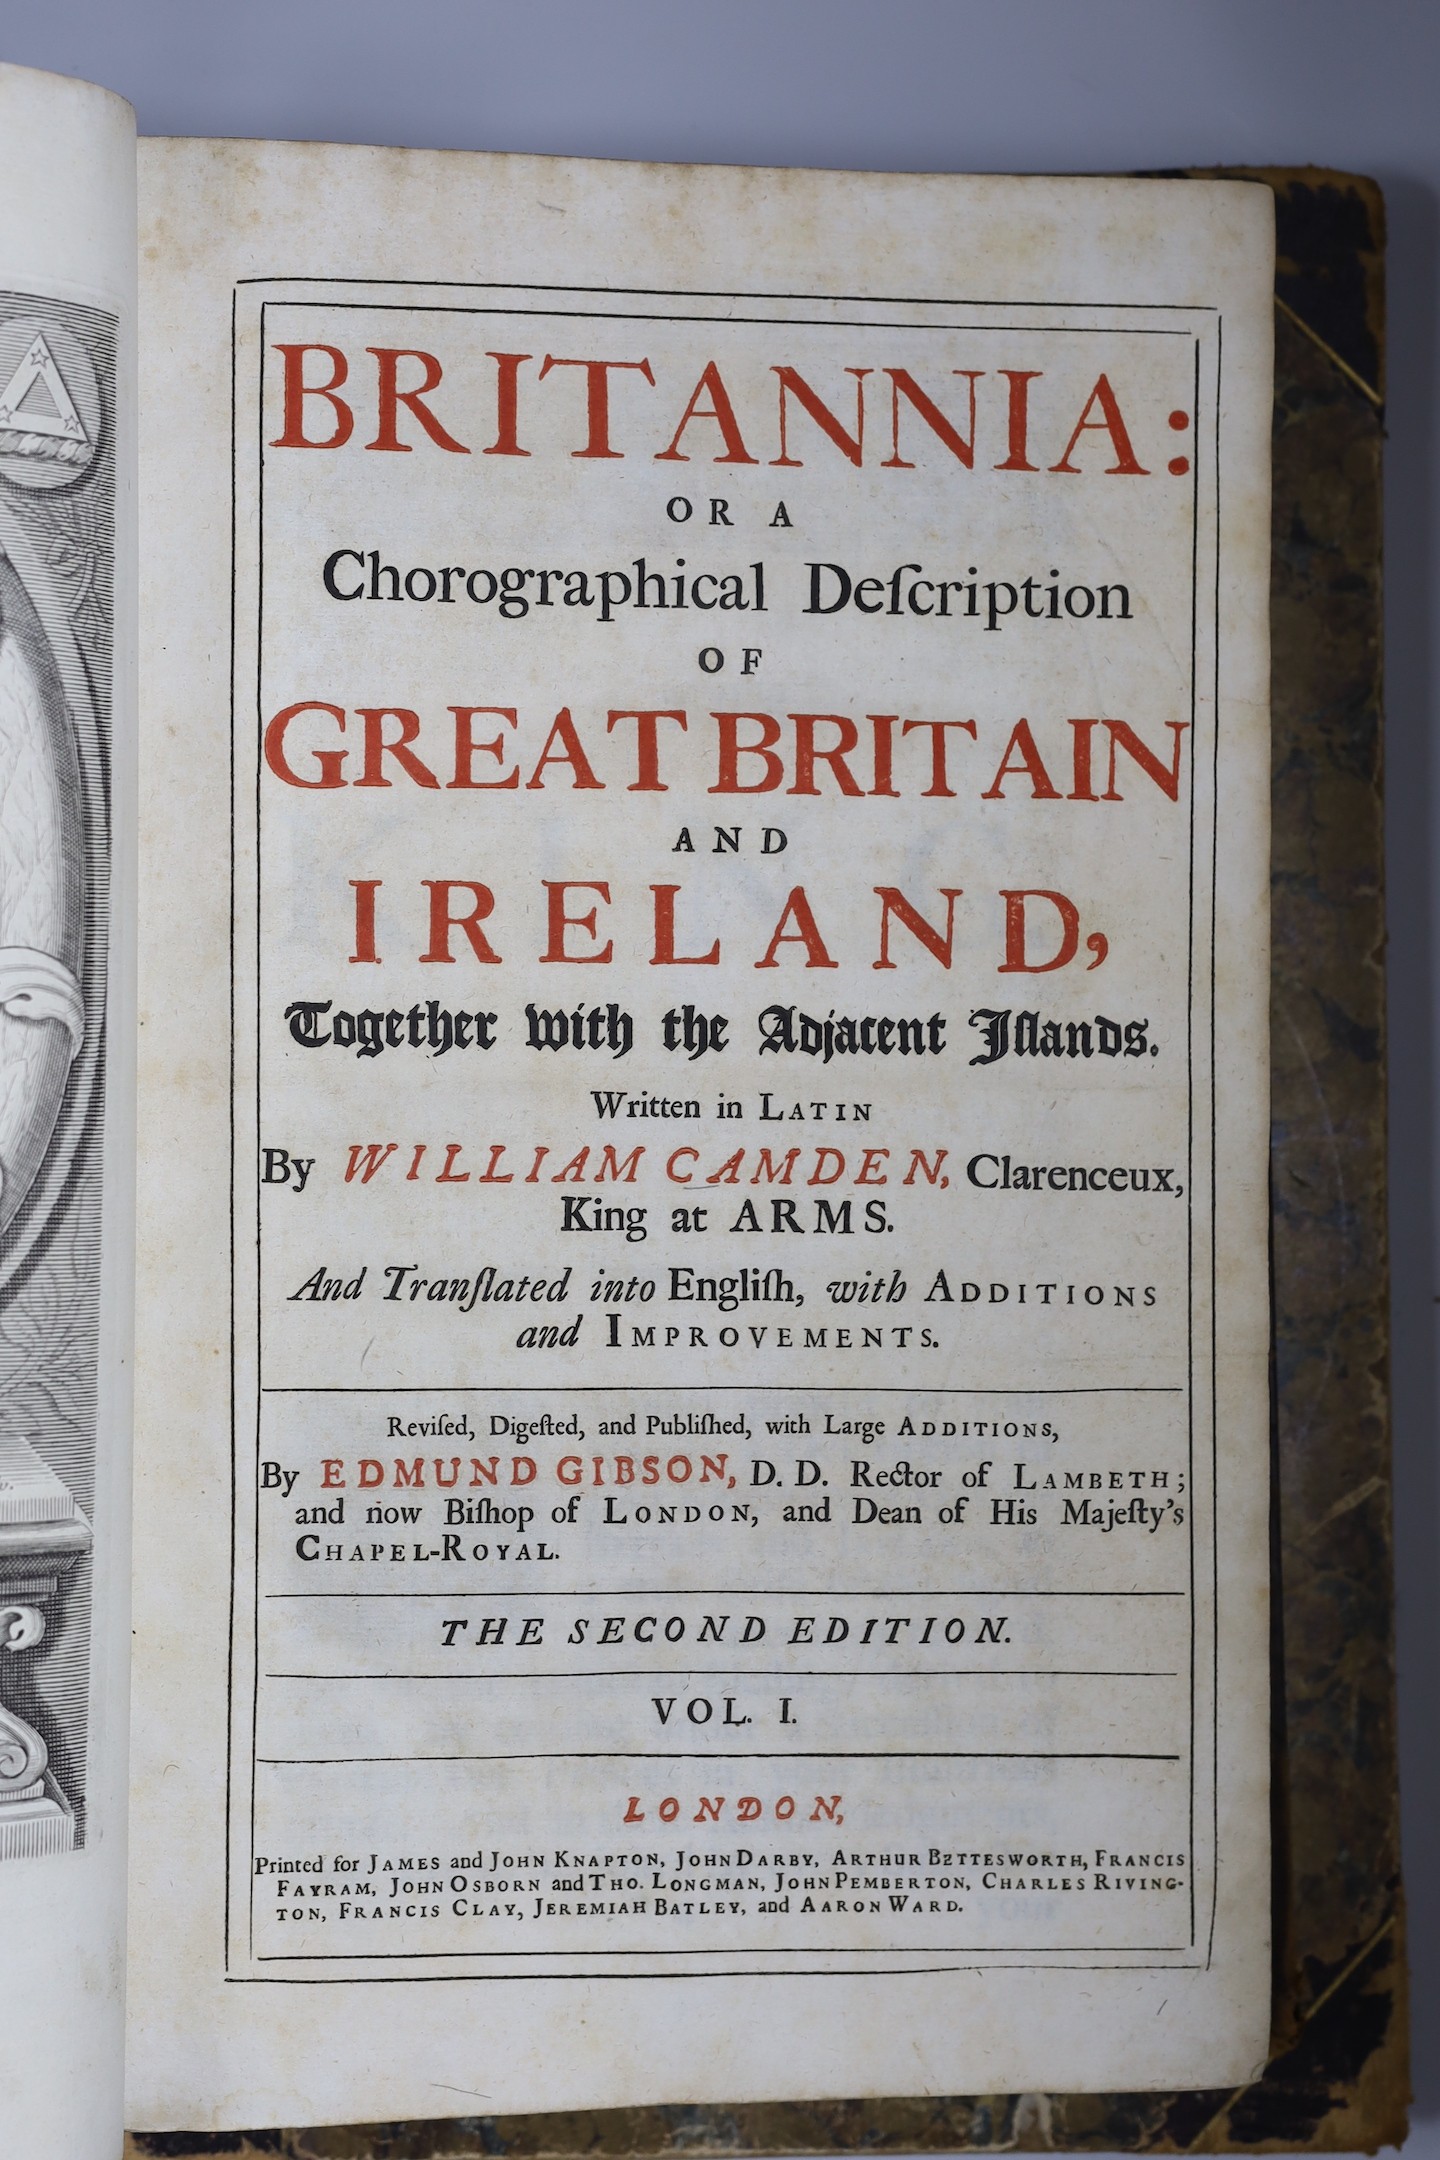 Camden, William. Britannia: or a Chorographical Description of Great Britain and Ireland....revised.... with large additions, by Edmund Gibson vol 1 (only, of 2), engraved portrait, plates and text illus. (without the Ro